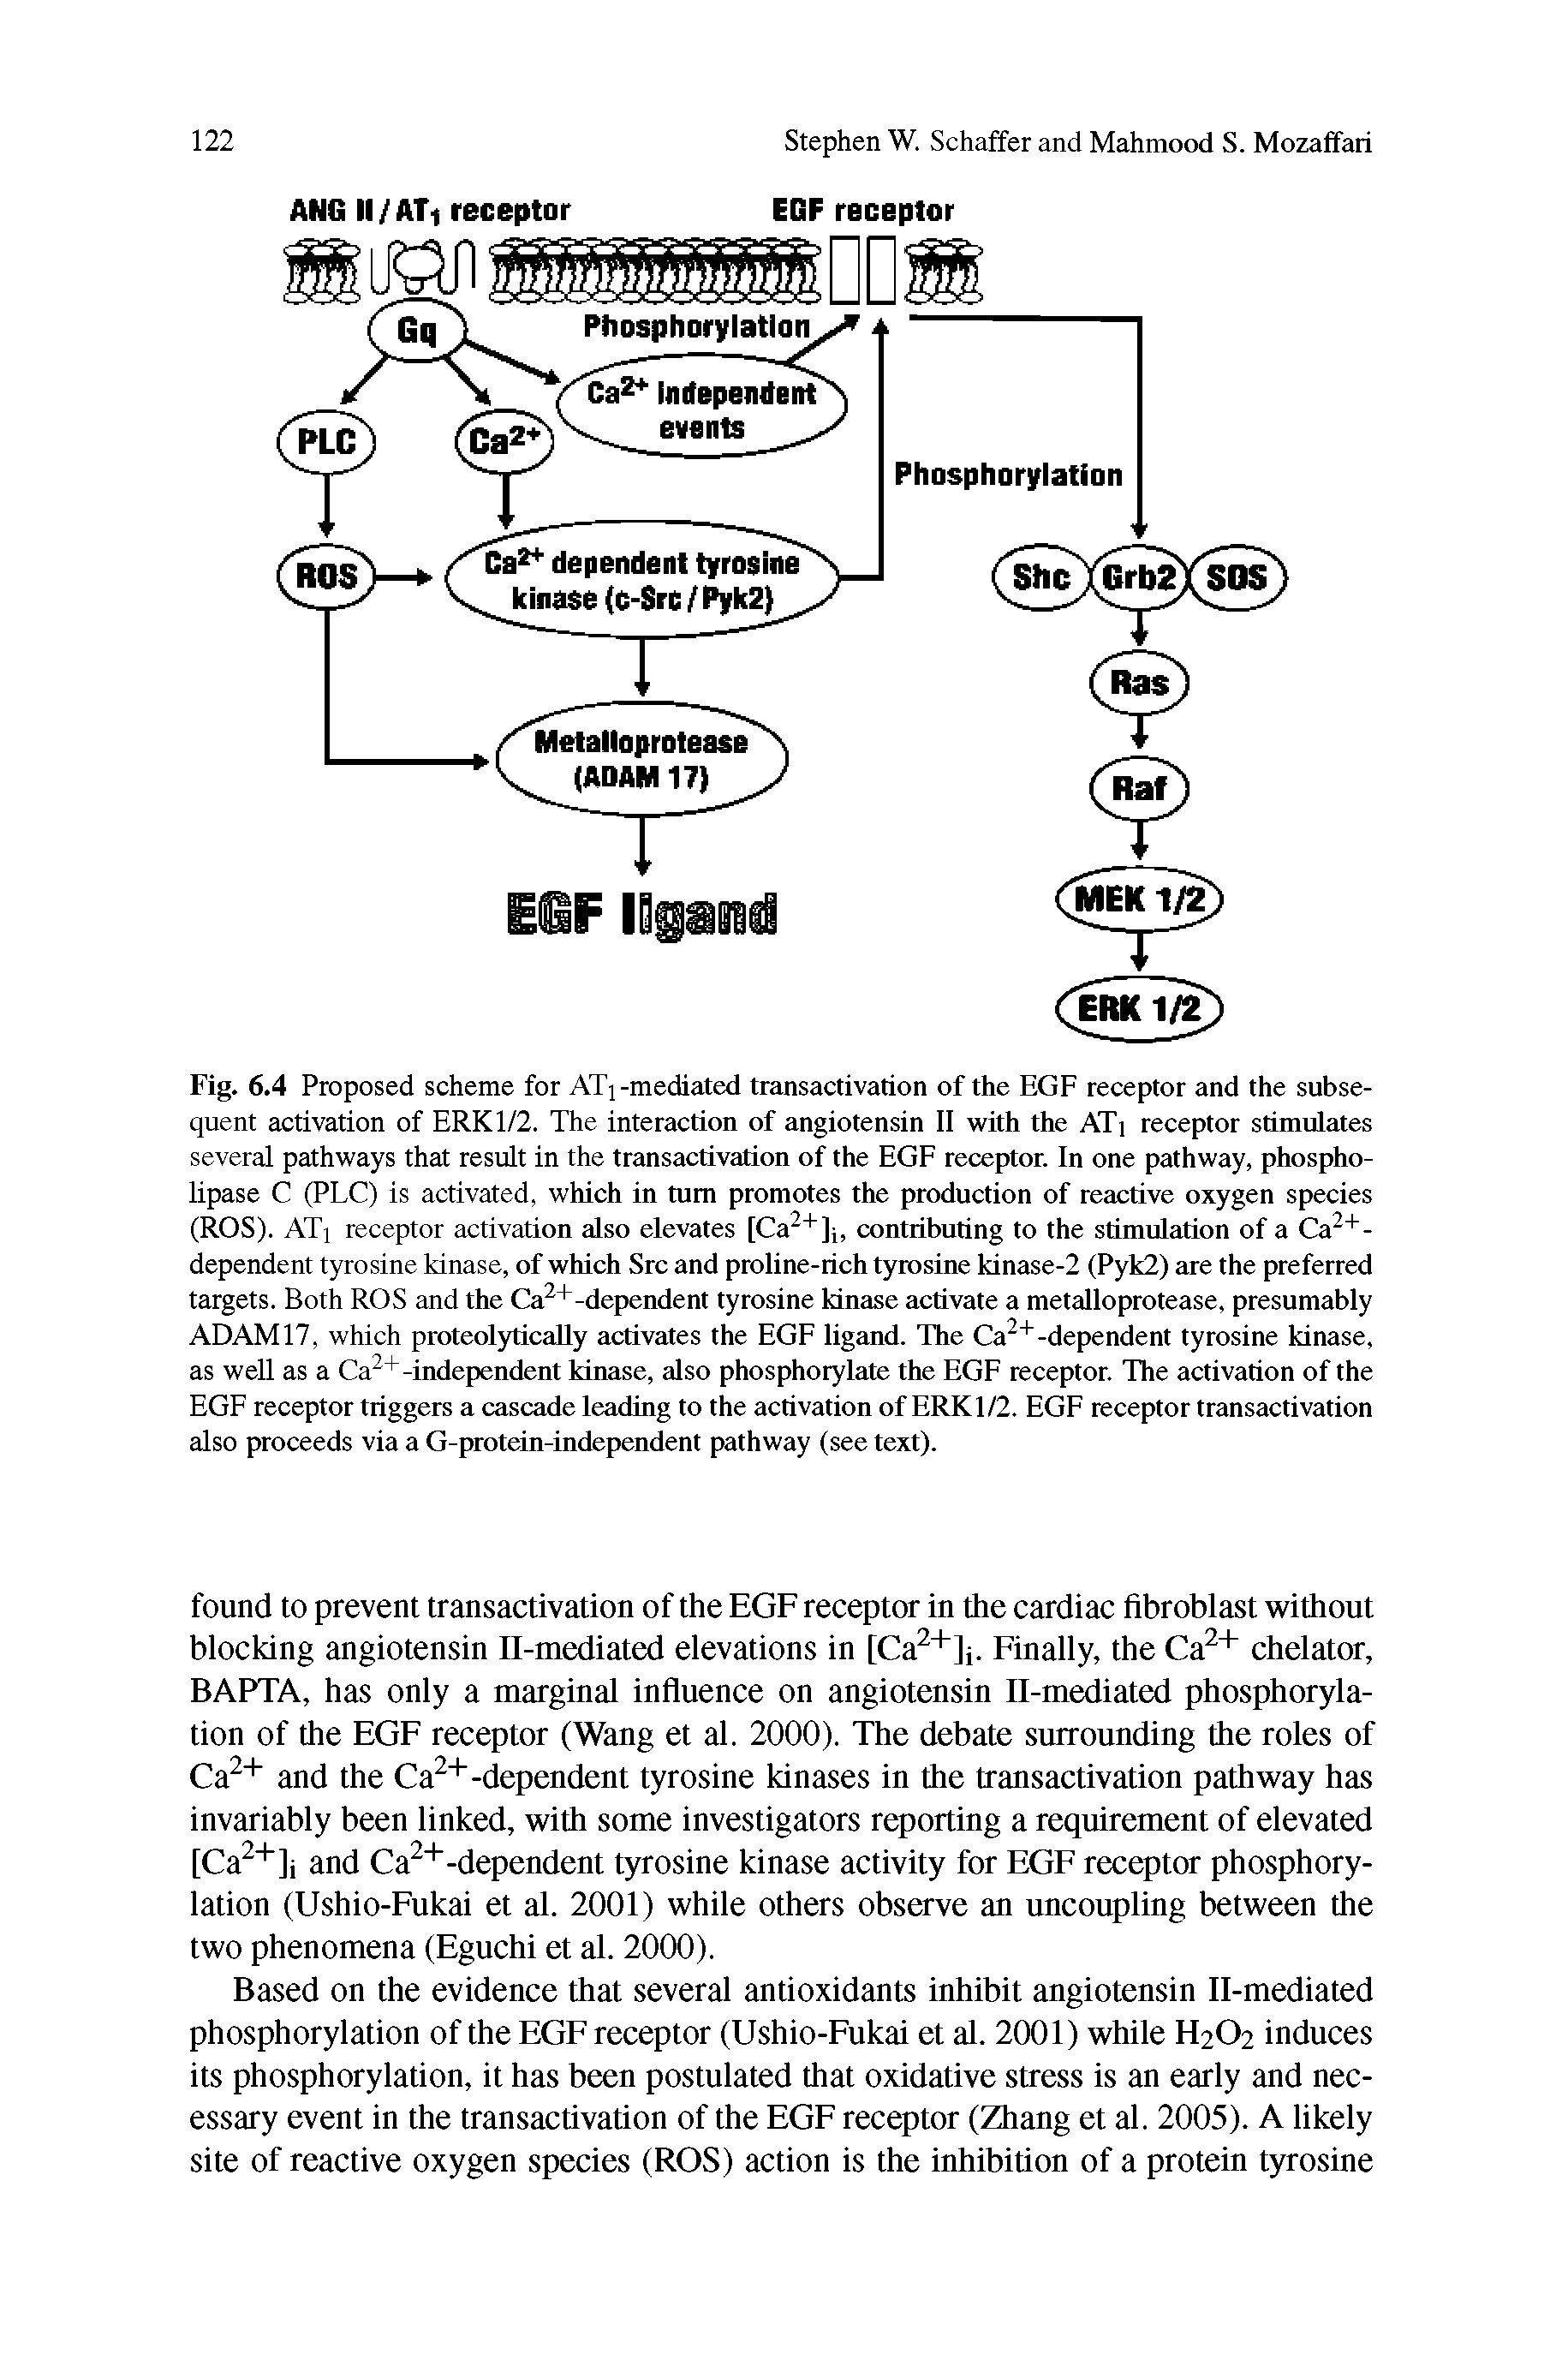 Fig. 6.4 Proposed scheme for ATj-mediated transactivation of the EGF receptor and the subsequent activation of ERK1/2. The interaction of angiotensin II with the ATi receptor stimulates several pathways that result in the transactivation of the EGF receptor. In one pathway, phospholipase C (PLC) is activated, which in turn promotes the production of reactive oxygen species (ROS). ATj receptor activation also elevates [Ca2+]j, contributing to the stimulation of a Ca2+-dependent tyrosine kinase, of which Src and proline-rich tyrosine kinase-2 (Pyk2) are the preferred targets. Both ROS and the Ca2+-dependent tyrosine kinase activate a metalloprotease, presumably ADAM17, which proteolytically activates the EGF ligand. The Ca2+-dependent tyrosine kinase, as well as a Ca2+-independent kinase, also phosphorylate the EGF receptor. The activation of the EGF receptor triggers a cascade leading to the activation of ERK1/2. EGF receptor transactivation also proceeds via a G-protein-independent pathway (see text).